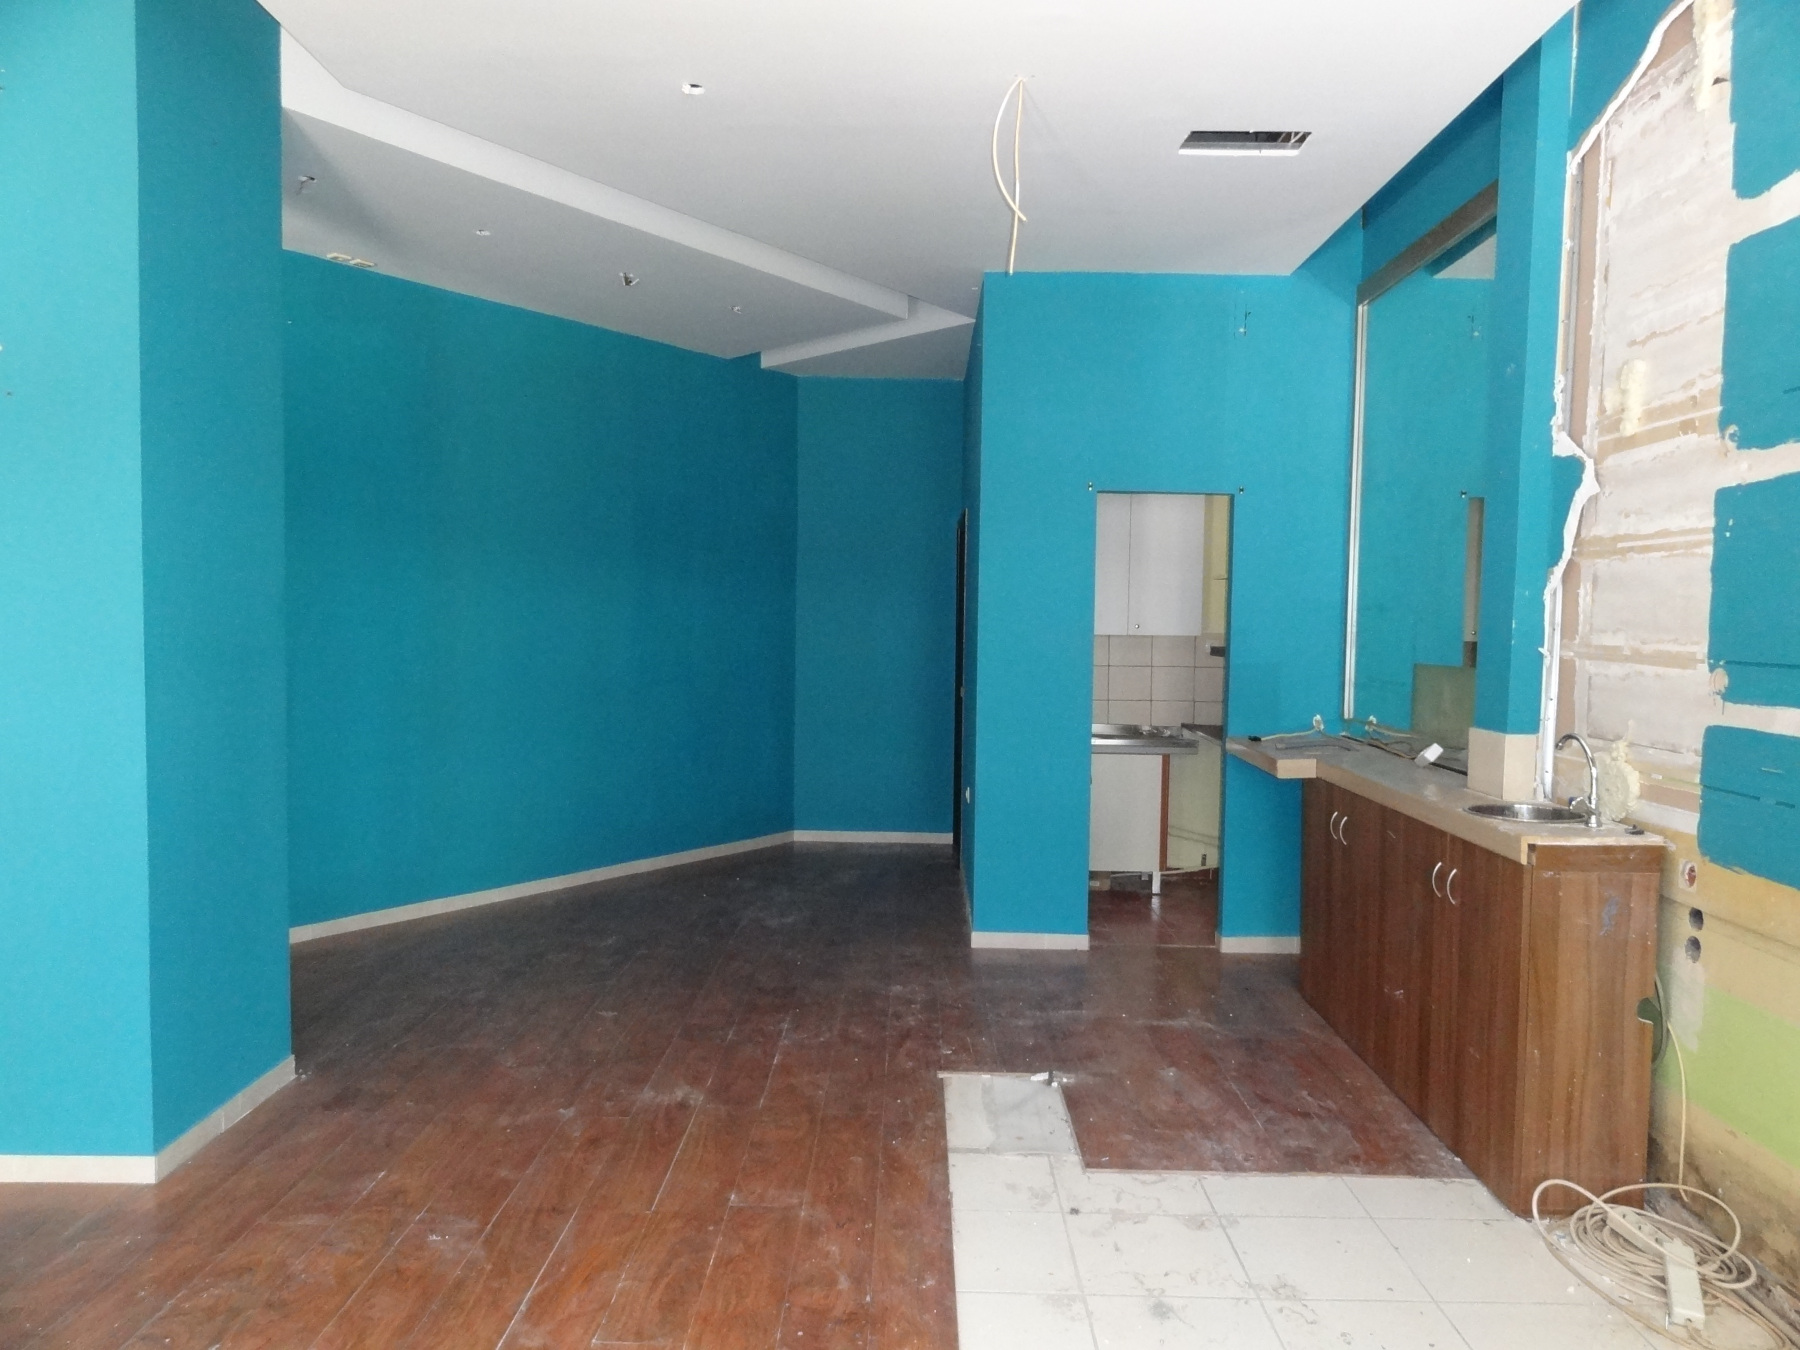 Ground floor commercial space for rent, 60 sq.m. in the center of Ioannina near the Courthouse